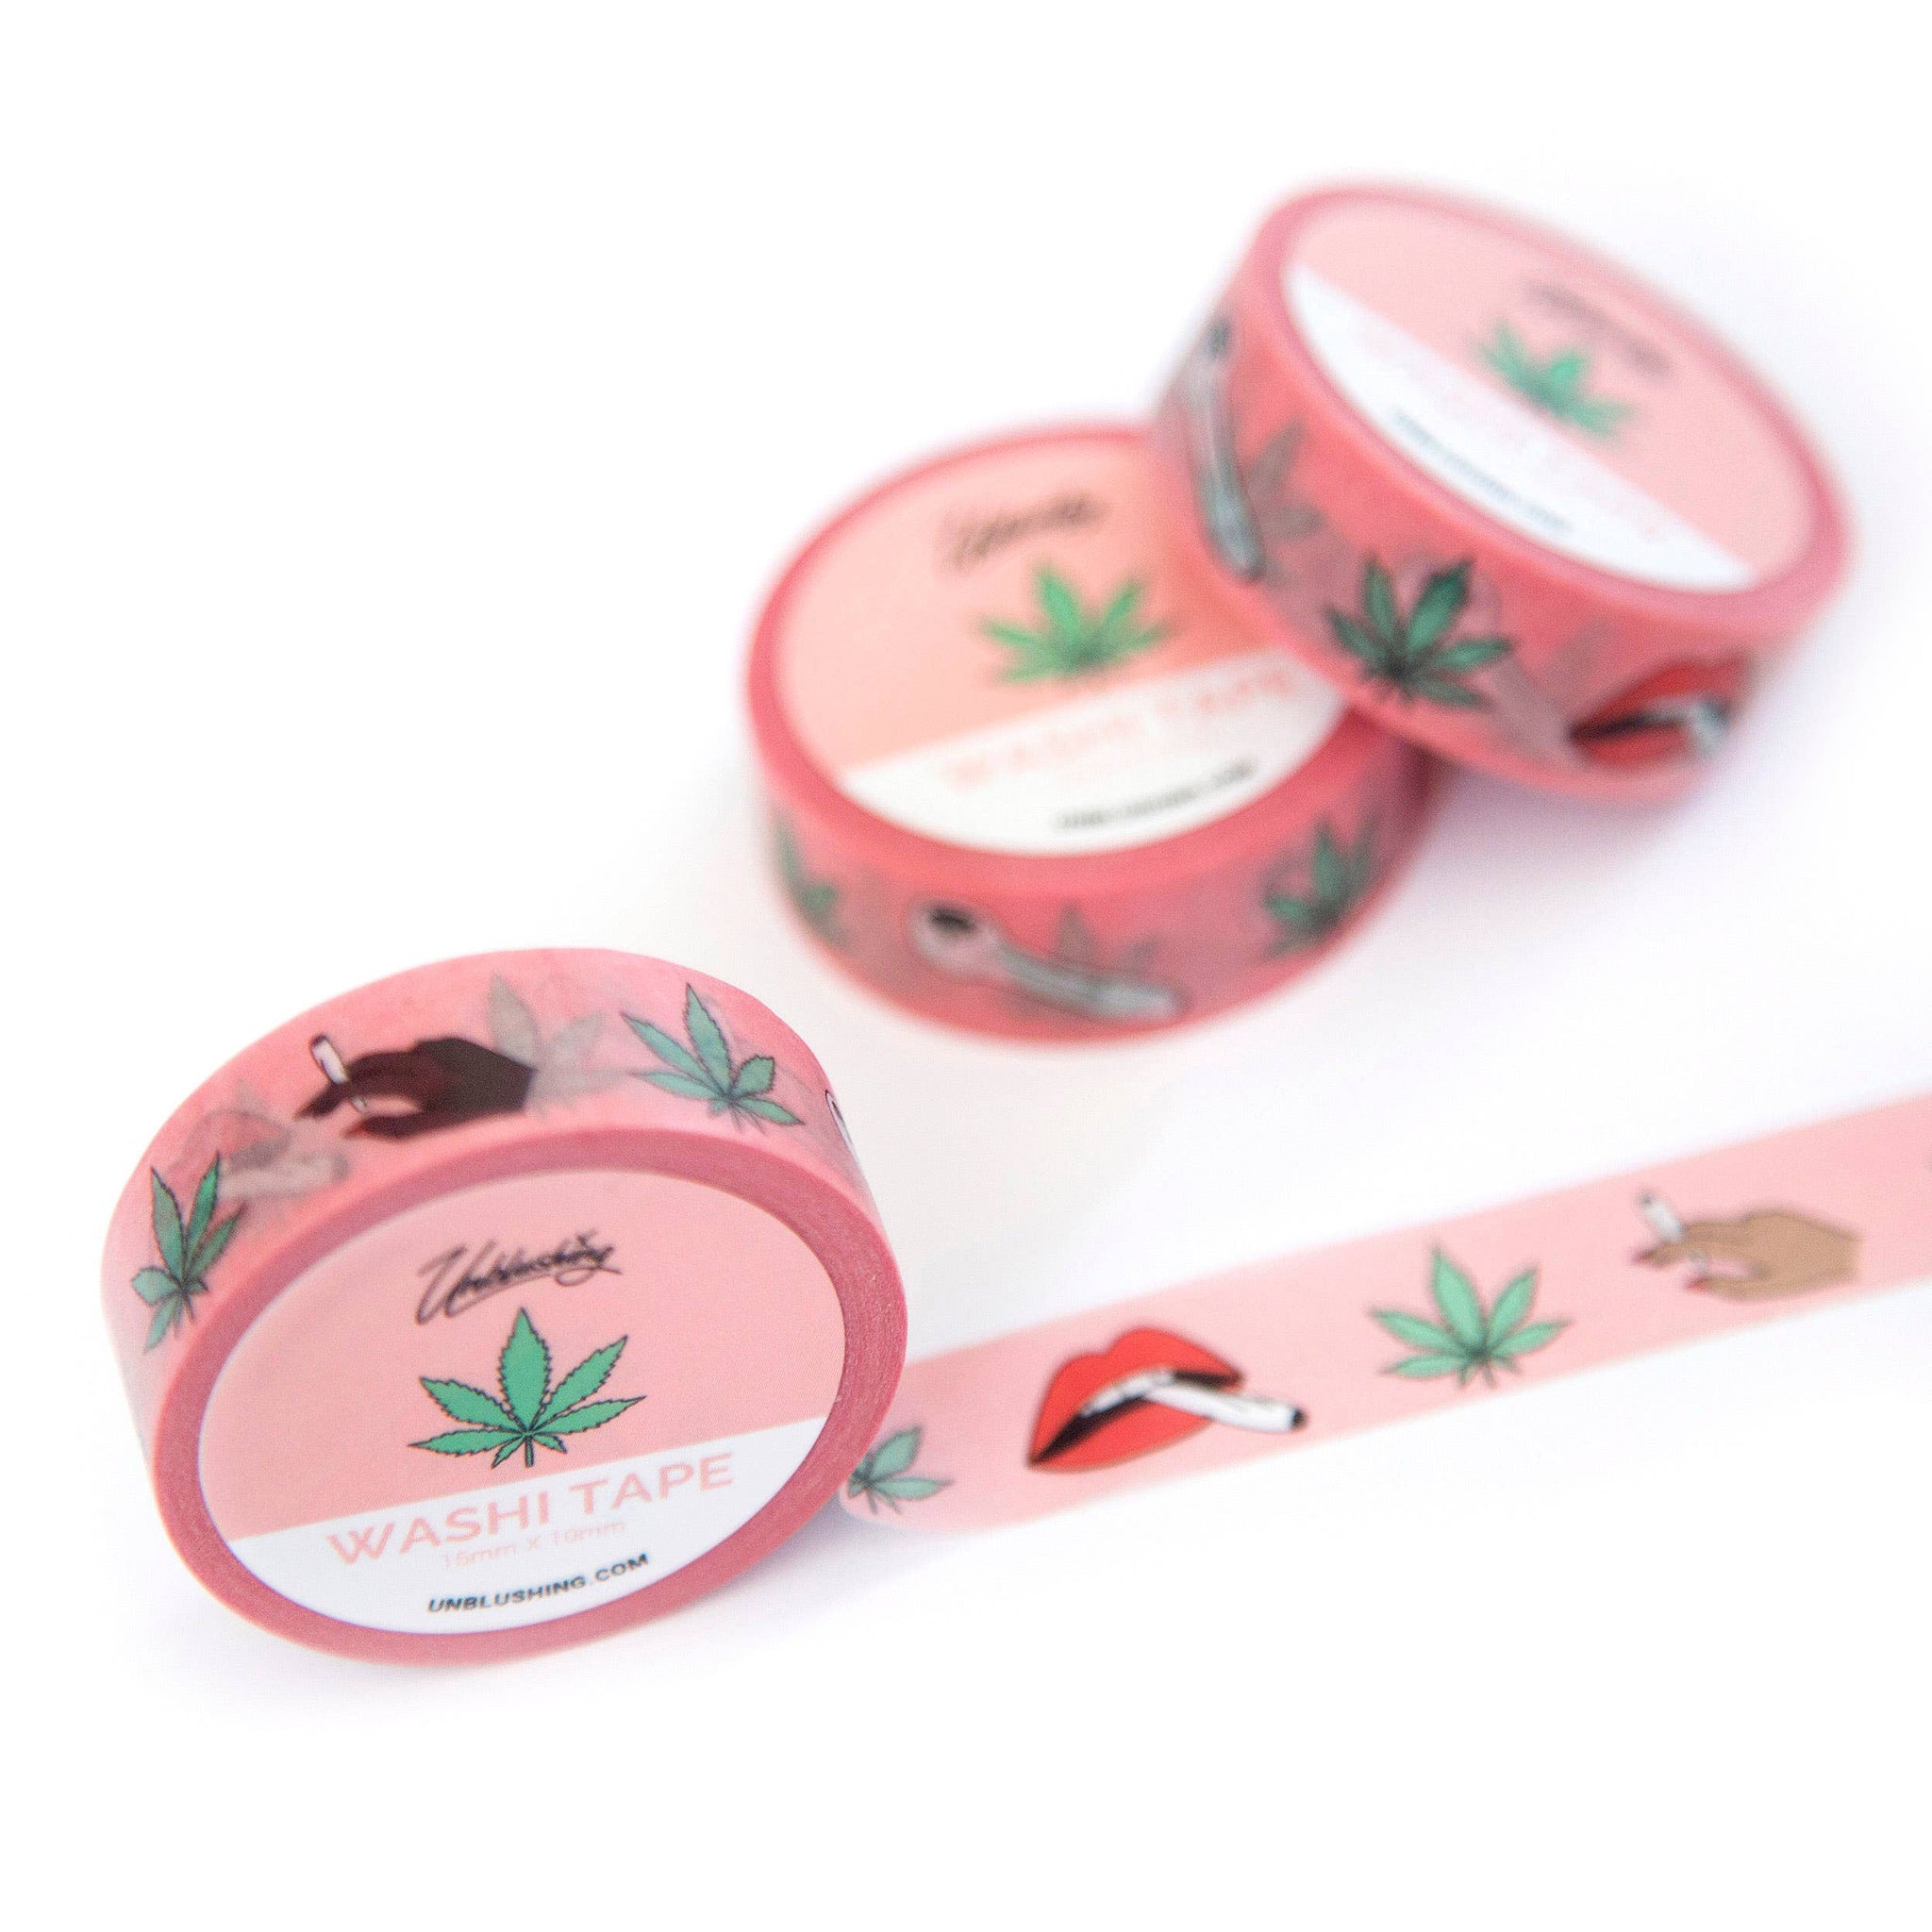 Weed Funny Body Positivity Snarky Gift  - Washi Tape - Weed